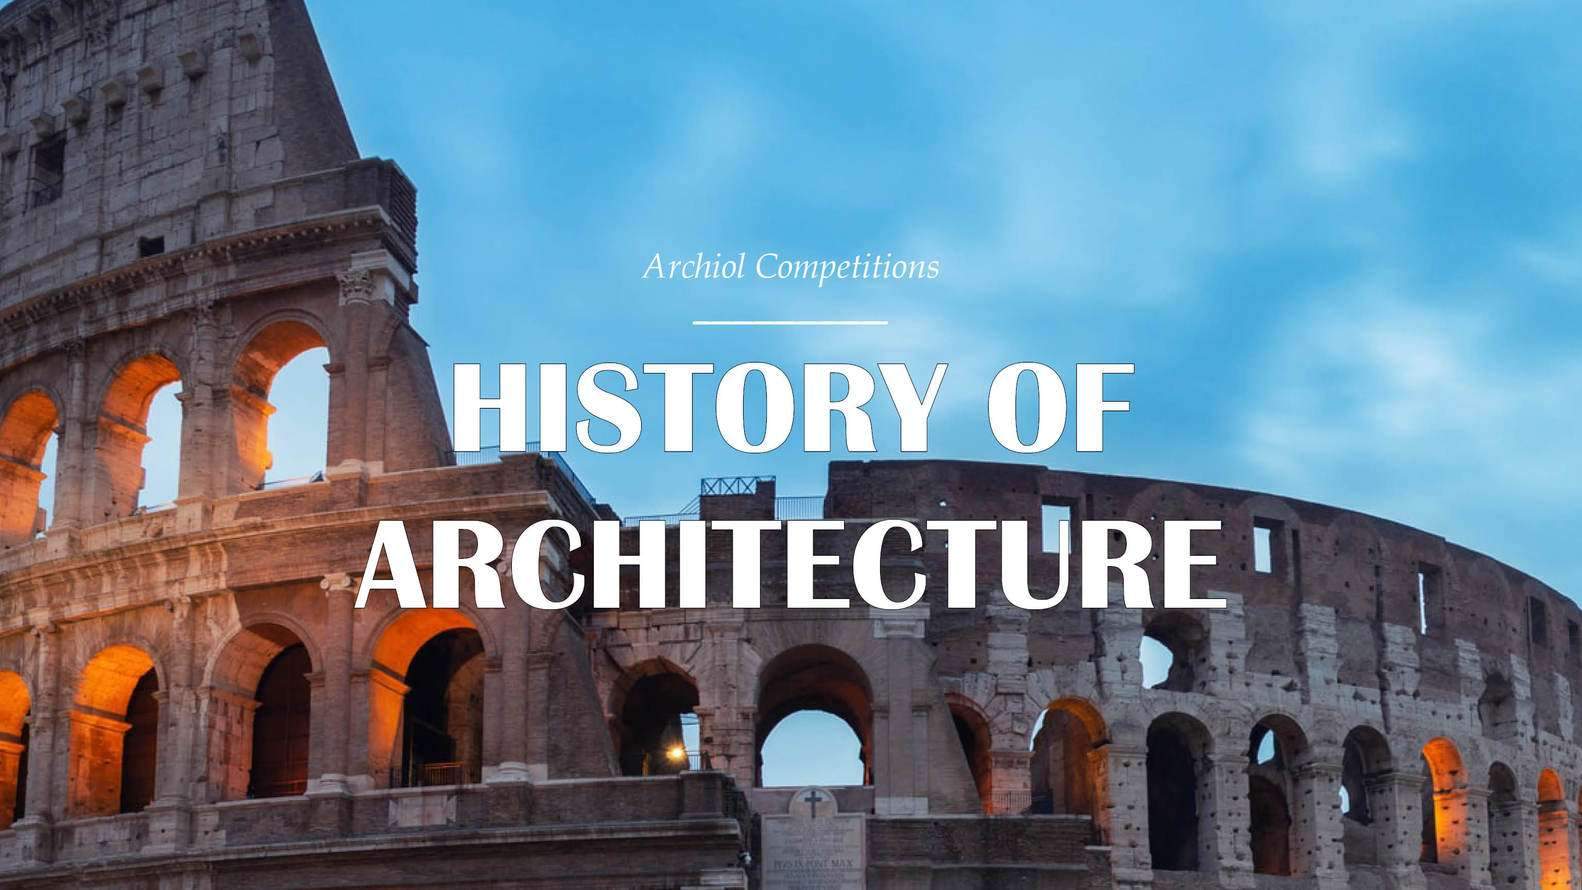 HISTORY OF ARCHITECTURE – Architectural Writing Competition